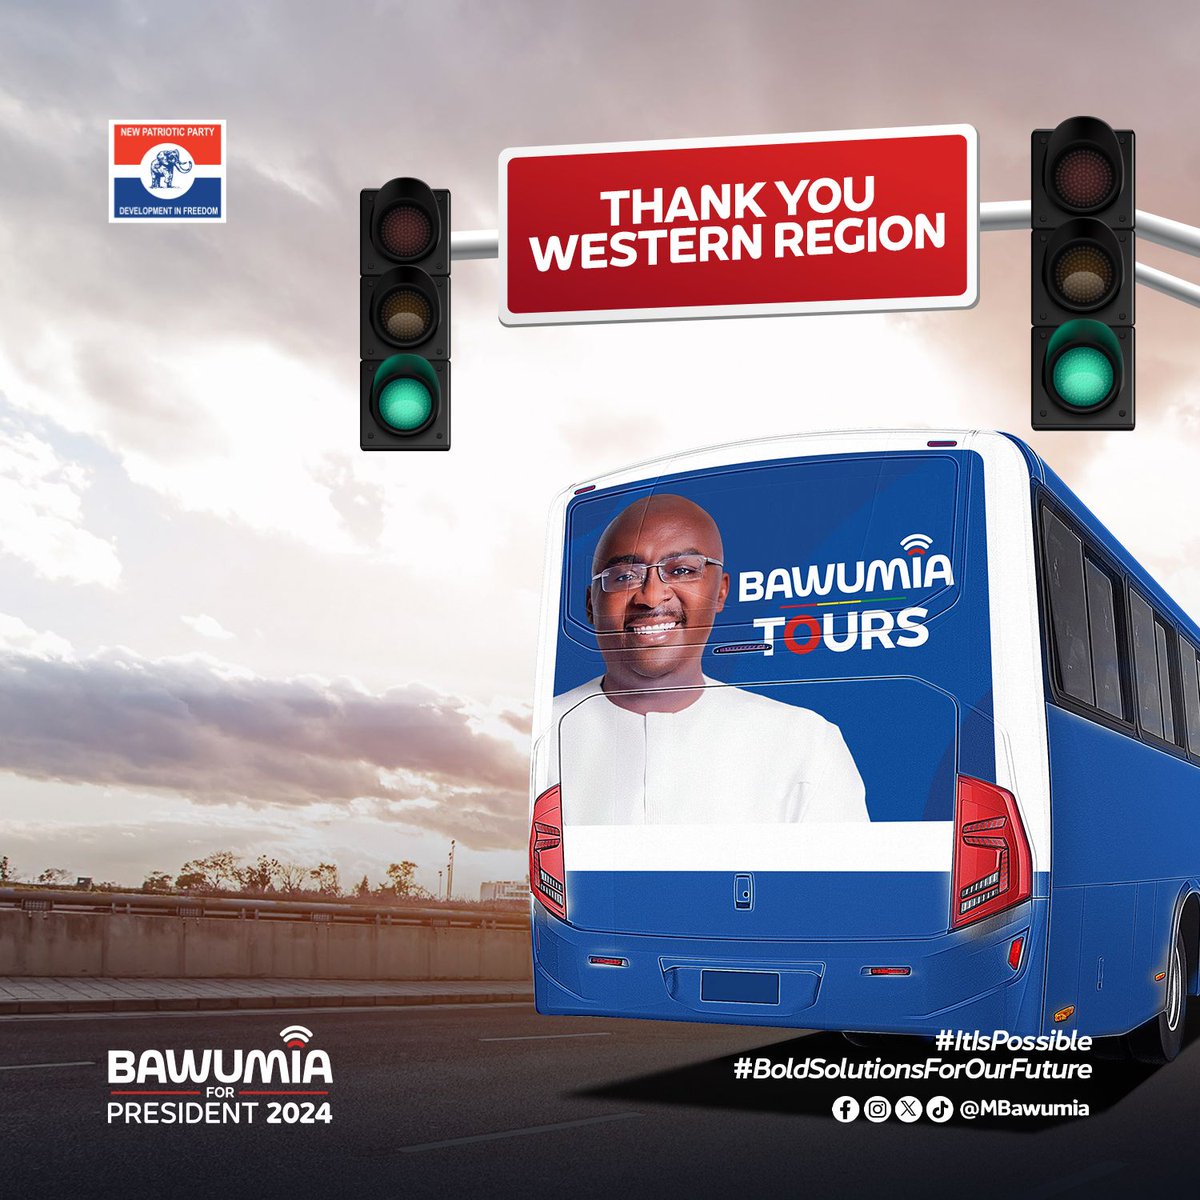 Thank you Western Region, It is Possible with you
#ItIsPossible 
#Bawumia2024 
#BawumiaTours